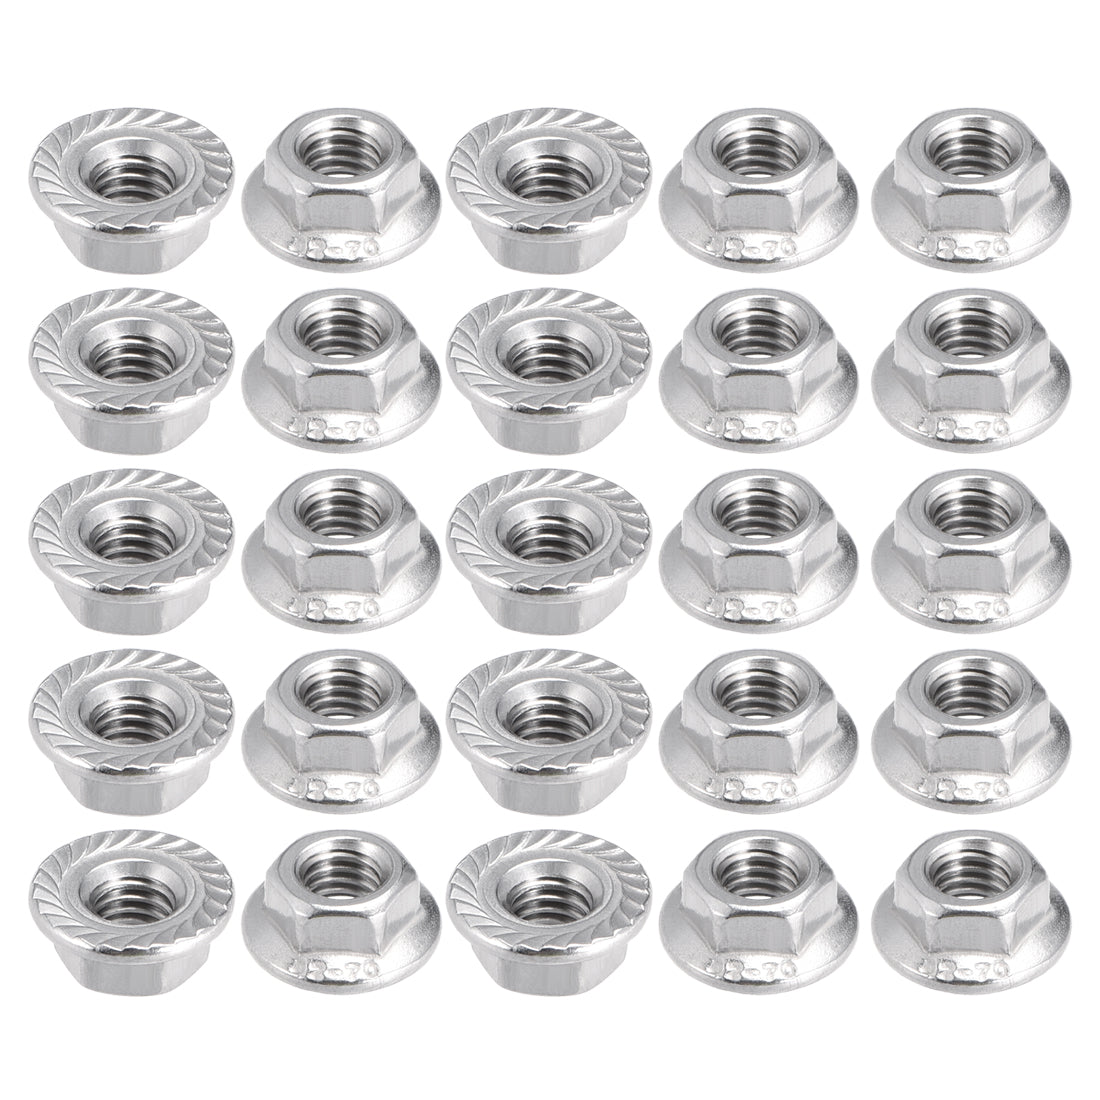 uxcell Uxcell M5 Serrated Flange Hex Lock Nuts, 304 Stainless Steel, 25 Pcs